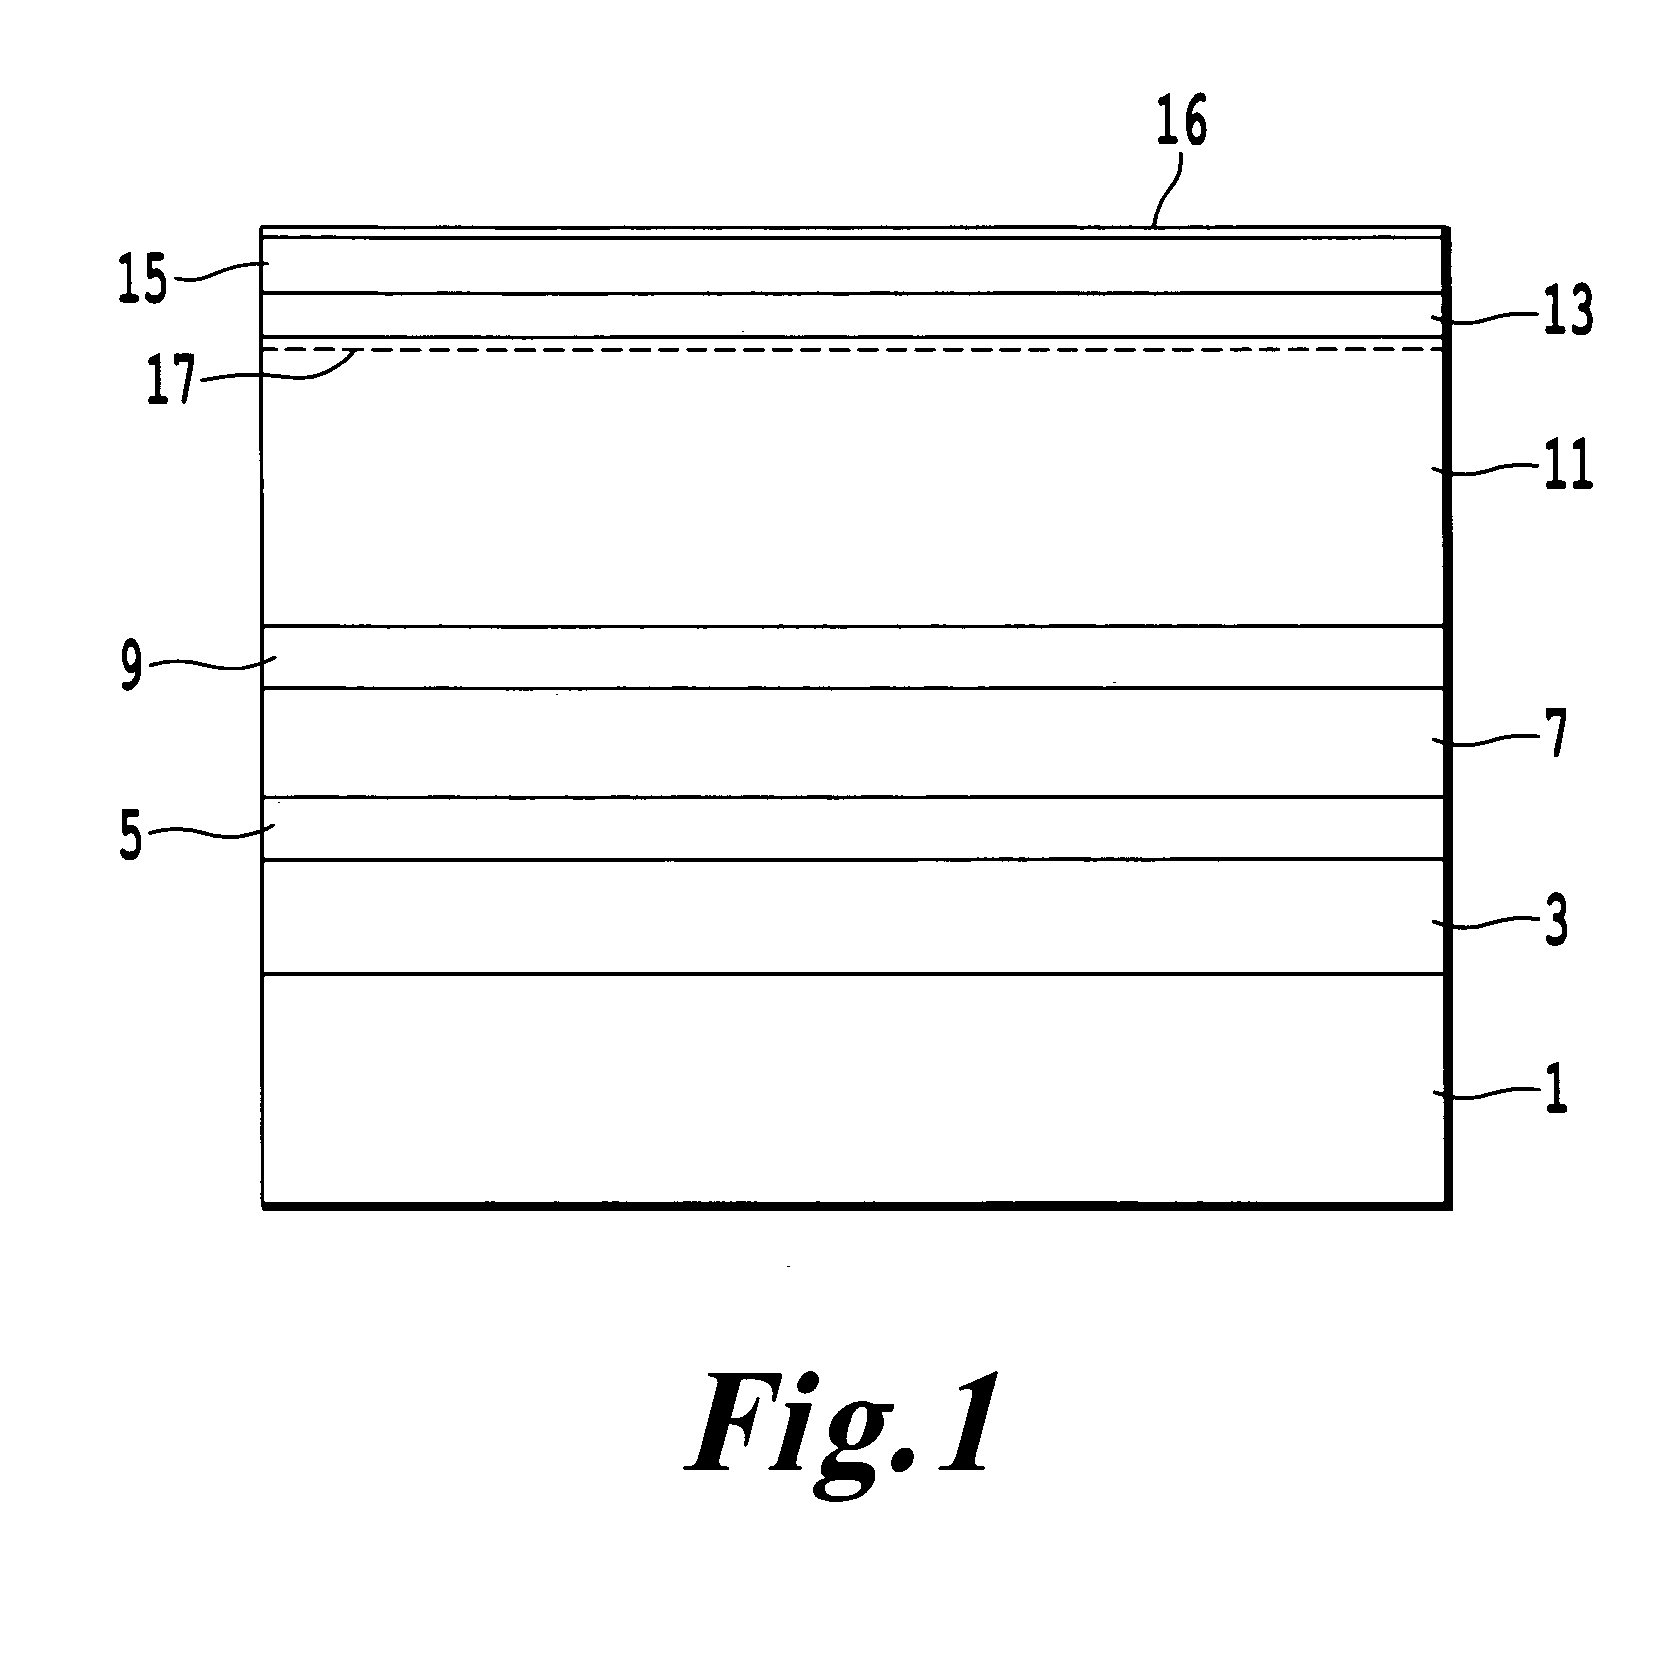 Semiconductor device and method of its manufacture